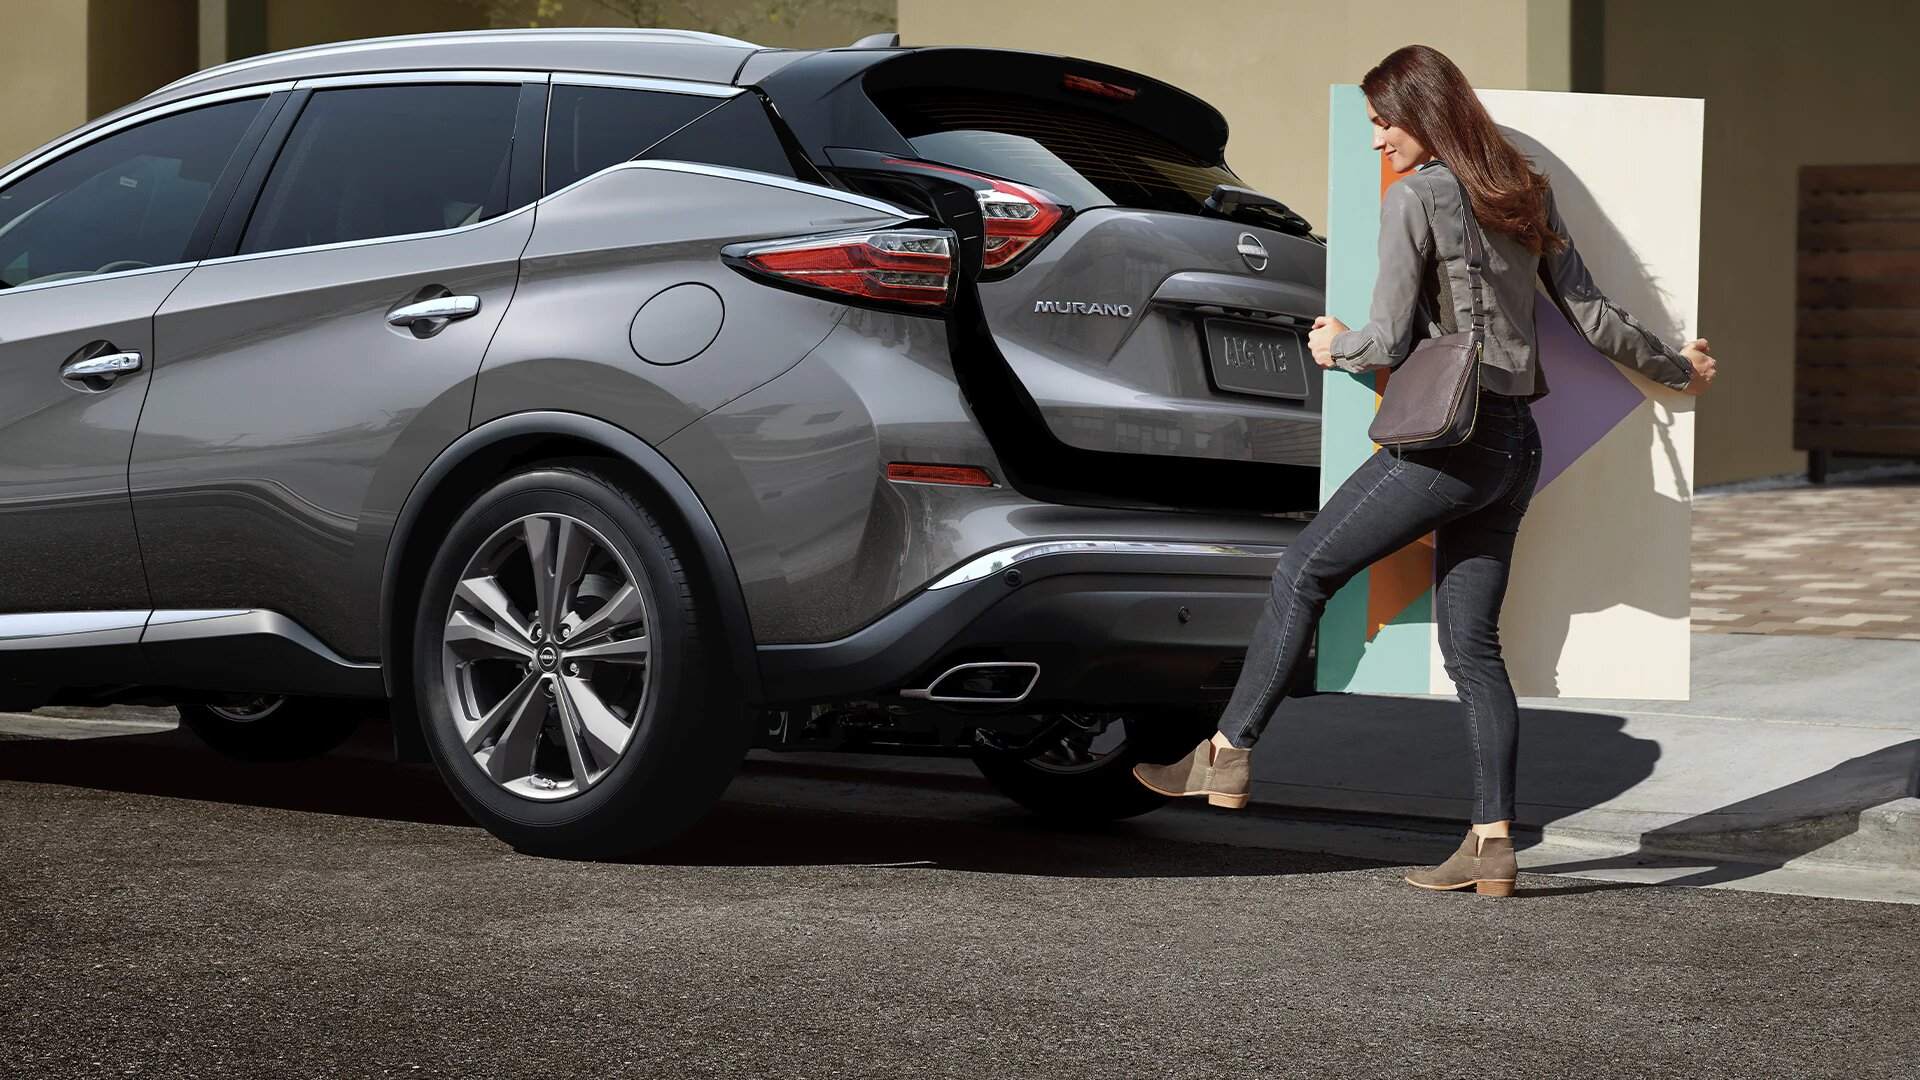 Visit Nissan of Cool Springs to explore our large selection of 2021 Nissan Murano, 2020 Nissan Murano, and 2019 Nissan Murano models. Our team is dedicated to helping you find the perfect car for you and your family. Stop by today to test drive a Nissan Murano and see why it's one of the best cars on the market.